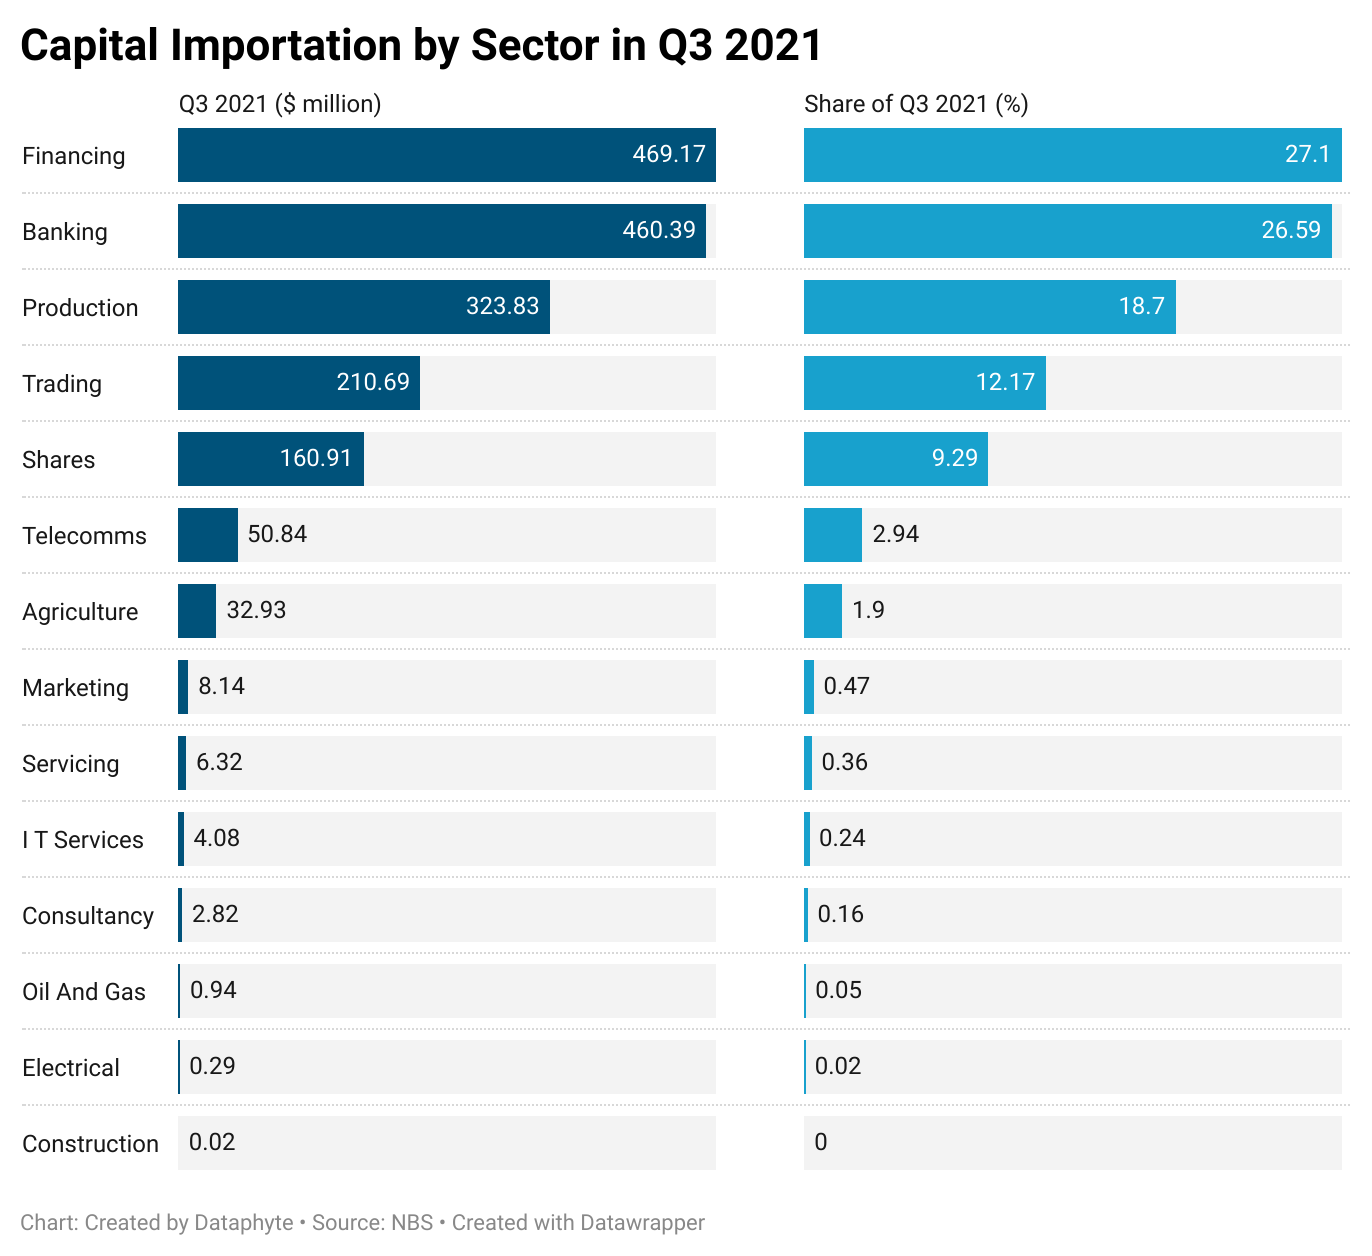 #ChartoftheDay: Capital Importation by Sector in Q3 2021